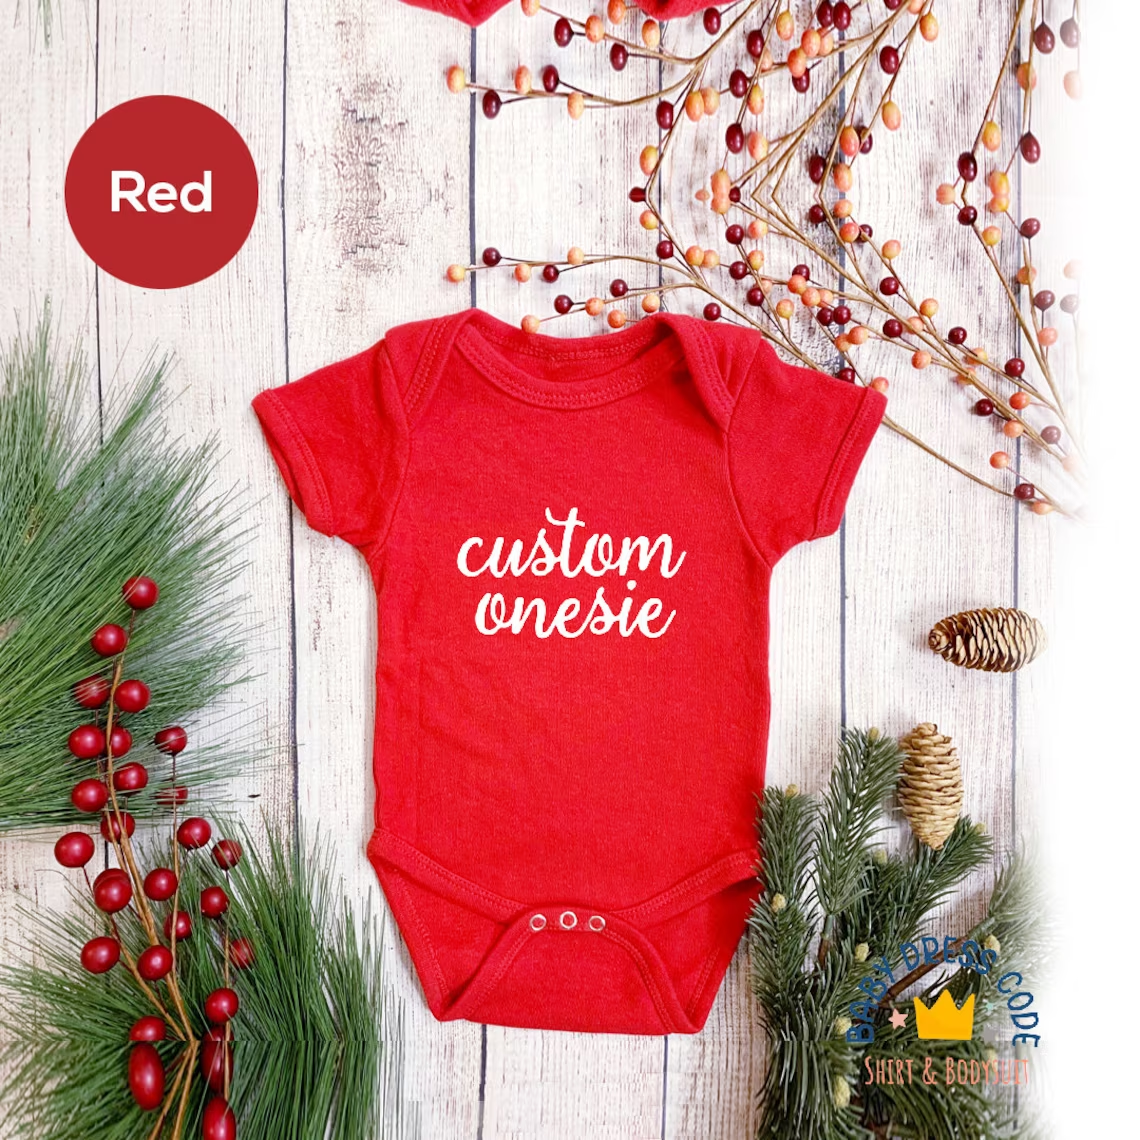 Red personalized onesie - Best unique baby gifts for new parents - Baby Journey